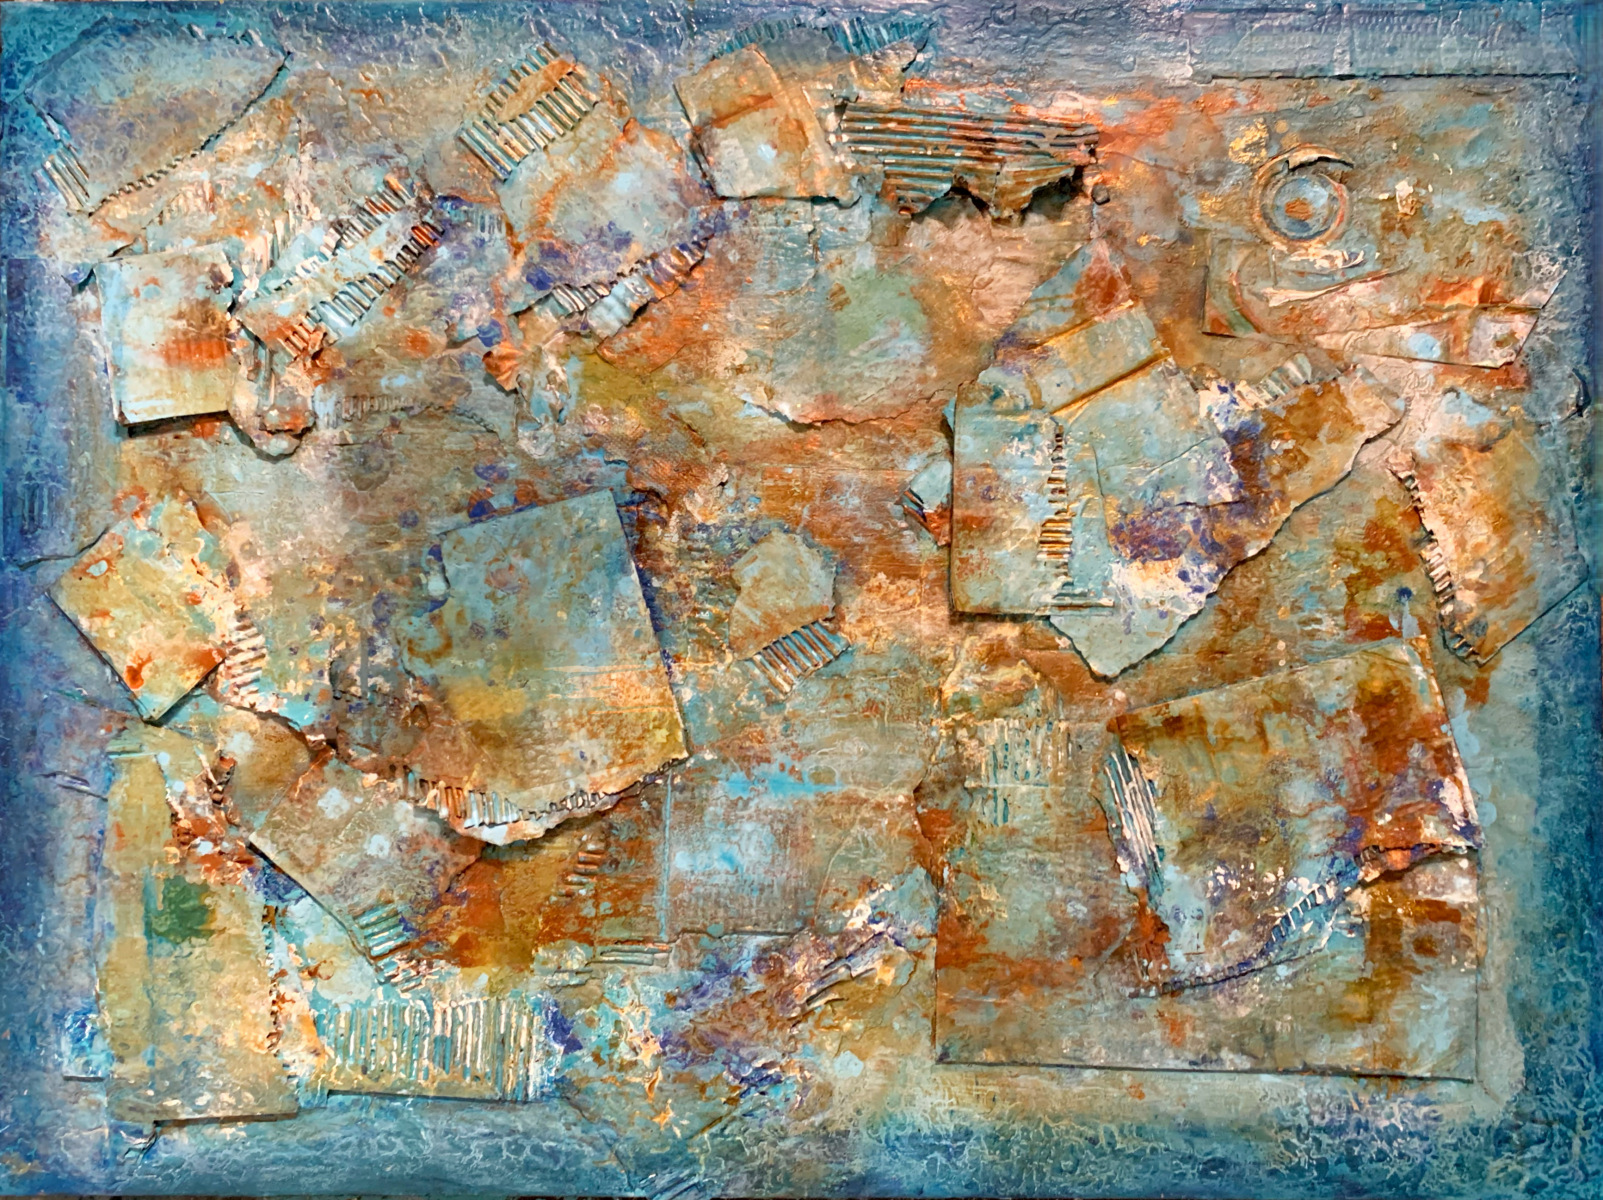 "Mineral deposits" 48x36h" mixed media recycled objects and paint on canvas$3900